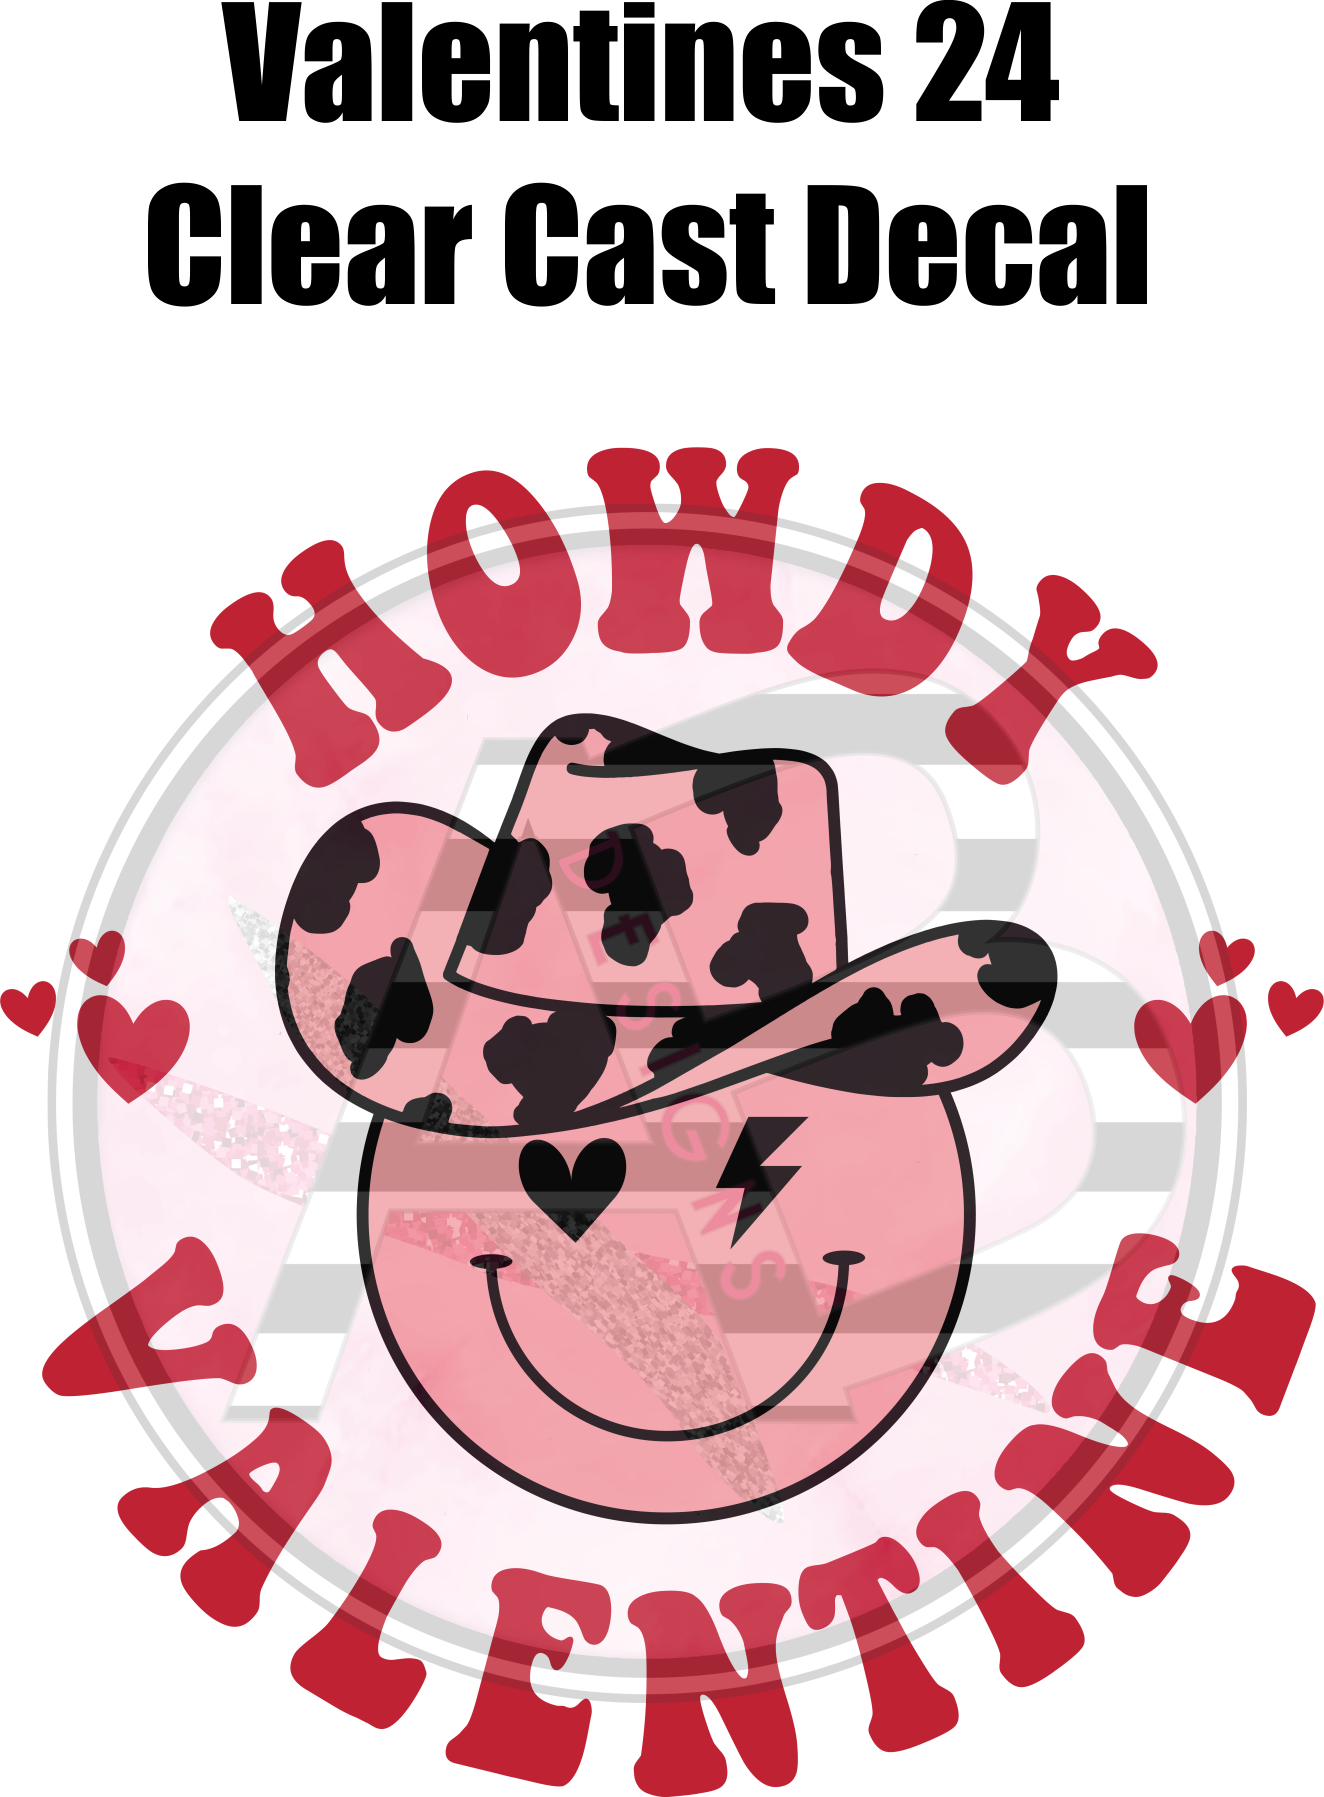 Valentines 24 - Clear Cast Decal